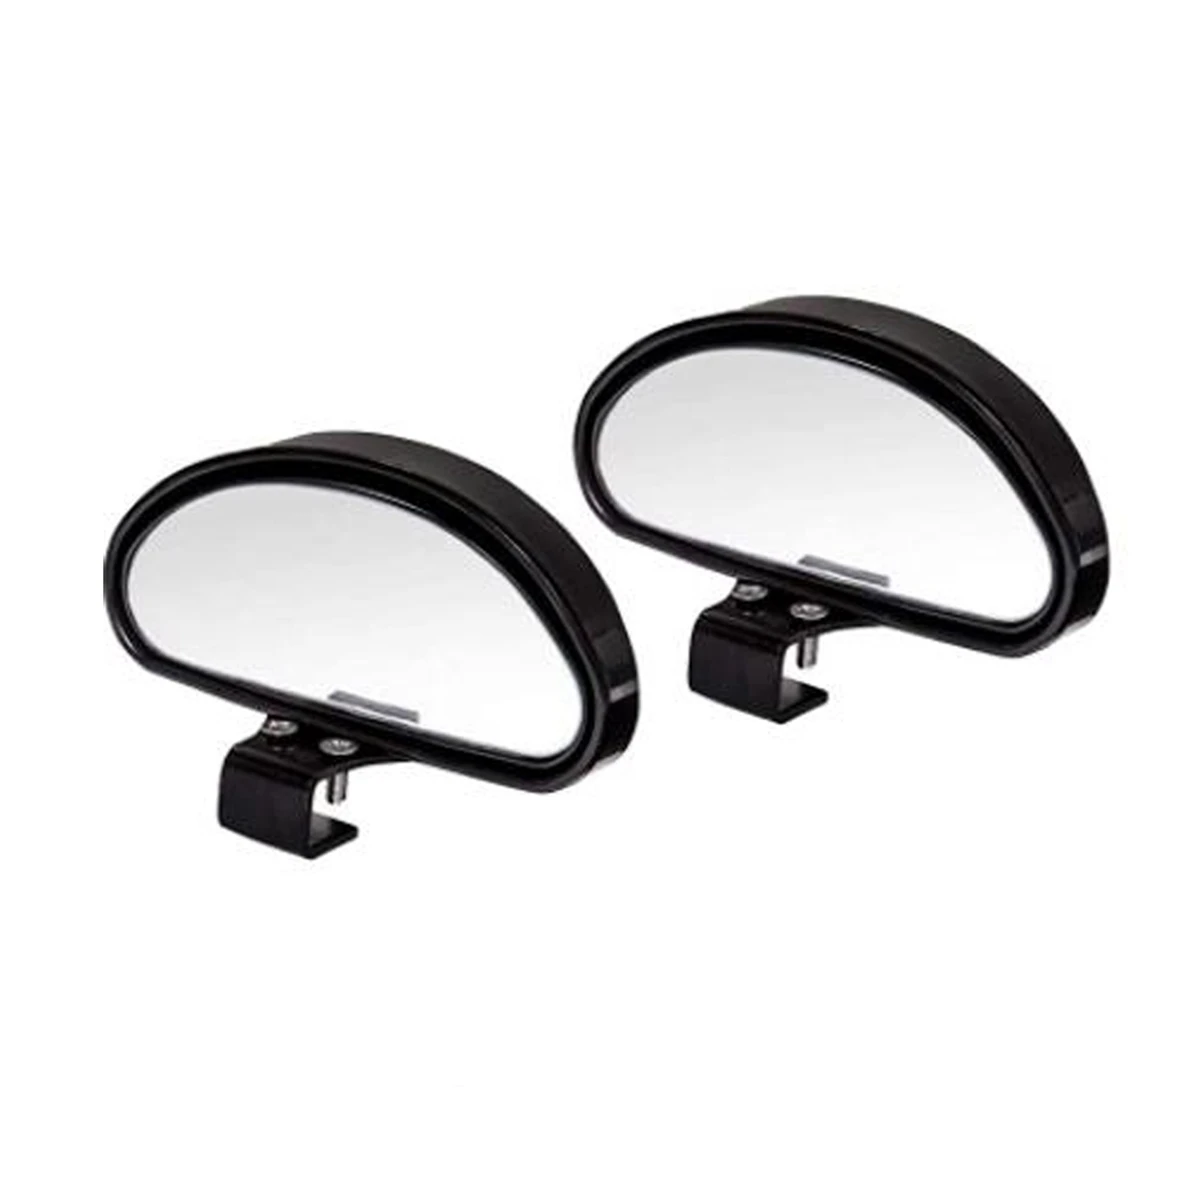 

Car Blind Spot Mirror, Wide Angle Convex 360 Degree Rotation Adjustable Rearview Mirror 2PCS (Black)